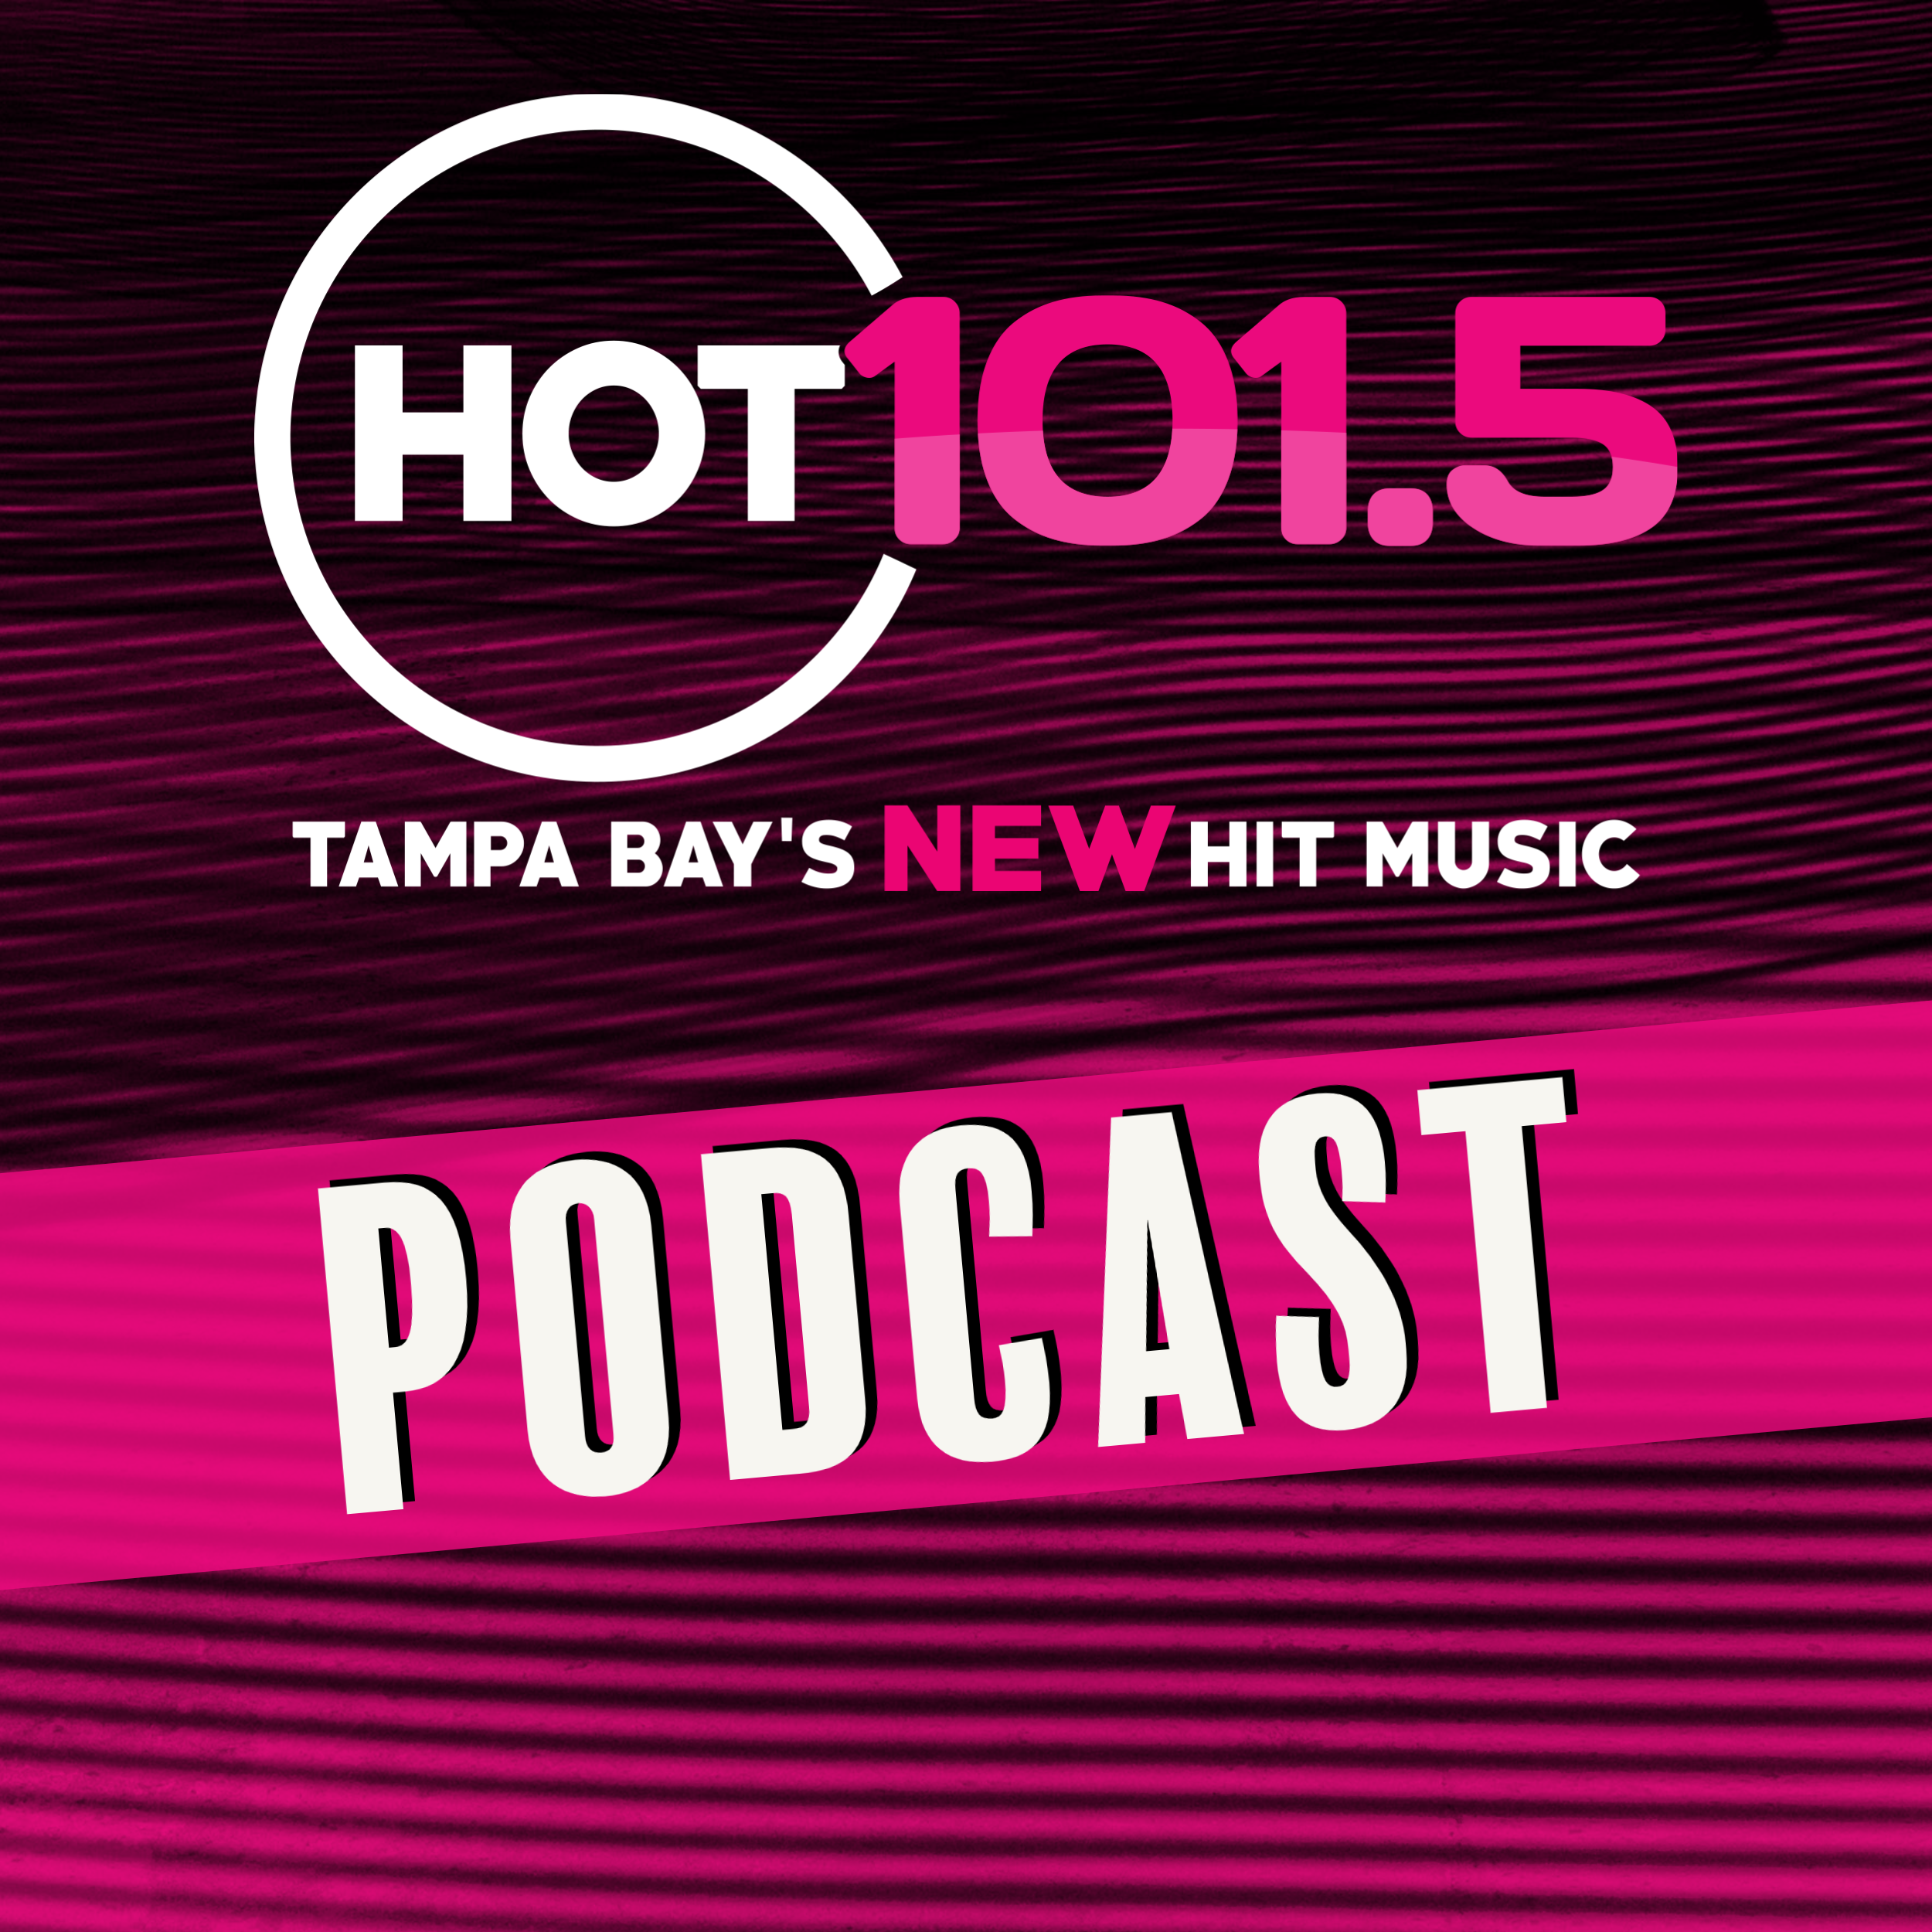 Hot 101.5 Podcast